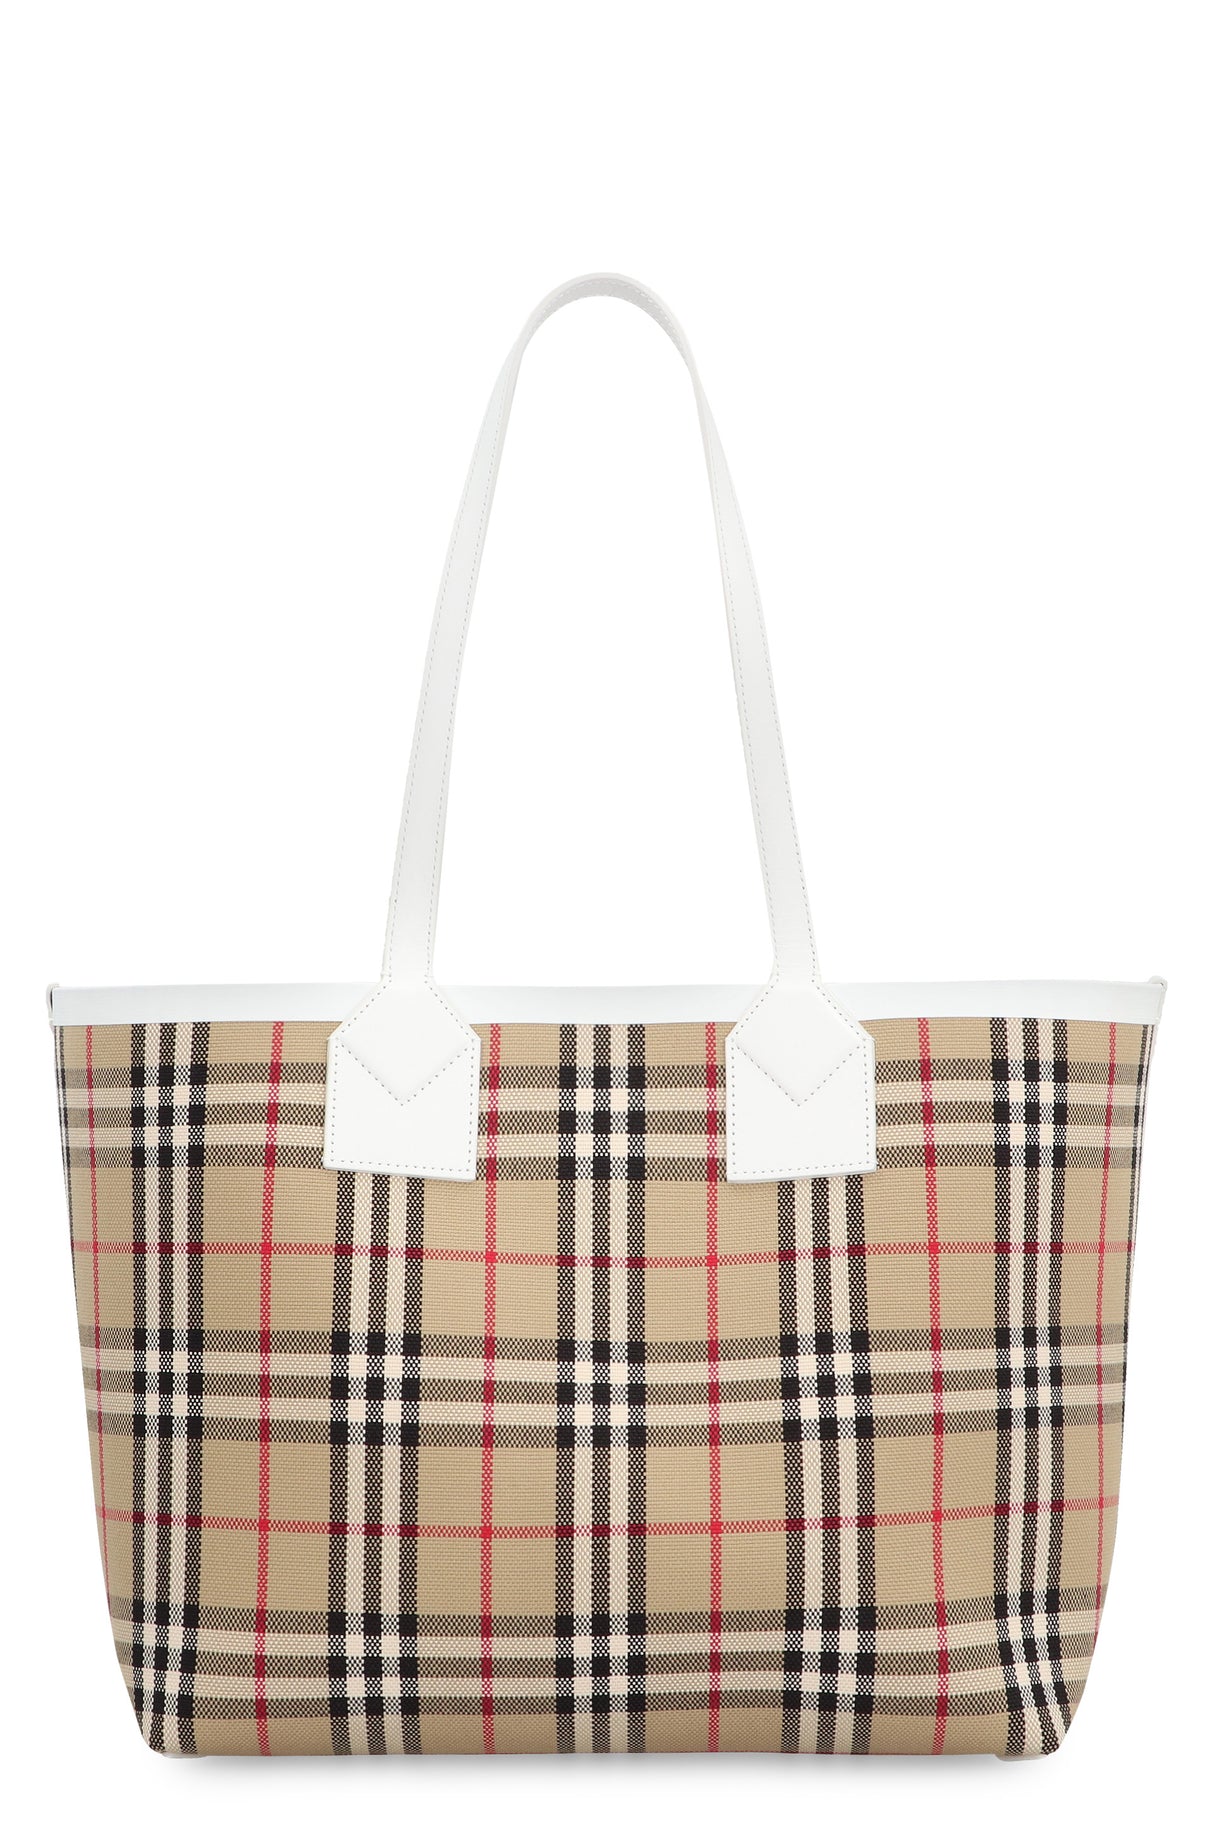 BURBERRY Chic Tan Check Canvas Tote with Leather Accents and Removable Clutch, Small - FW23